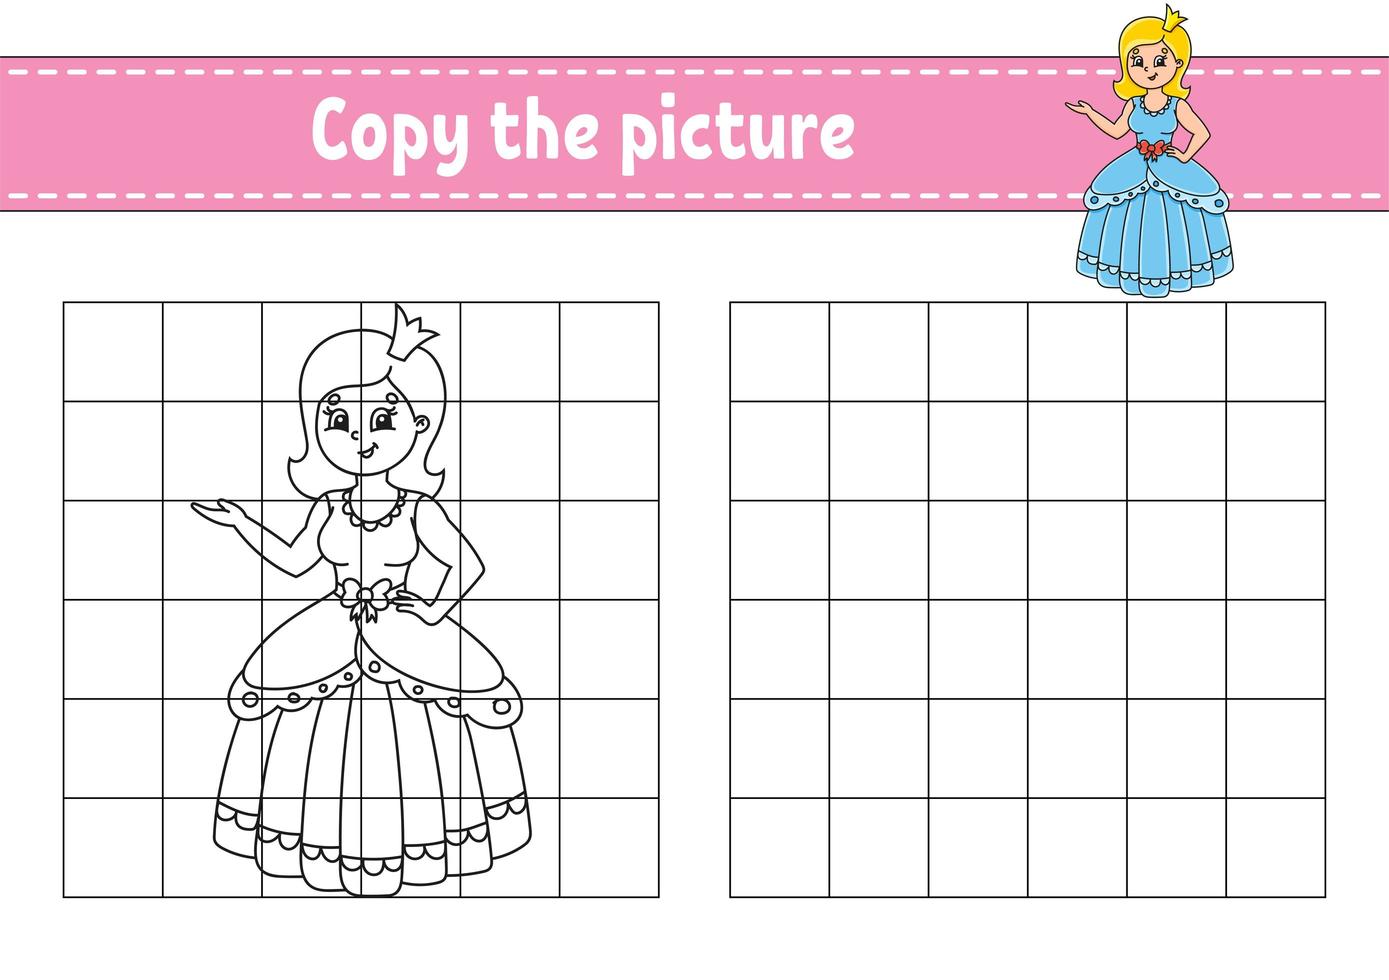 Copy the picture. Coloring book pages for kids. Education developing worksheet. Game for children. Handwriting practice. Cartoon character. vector